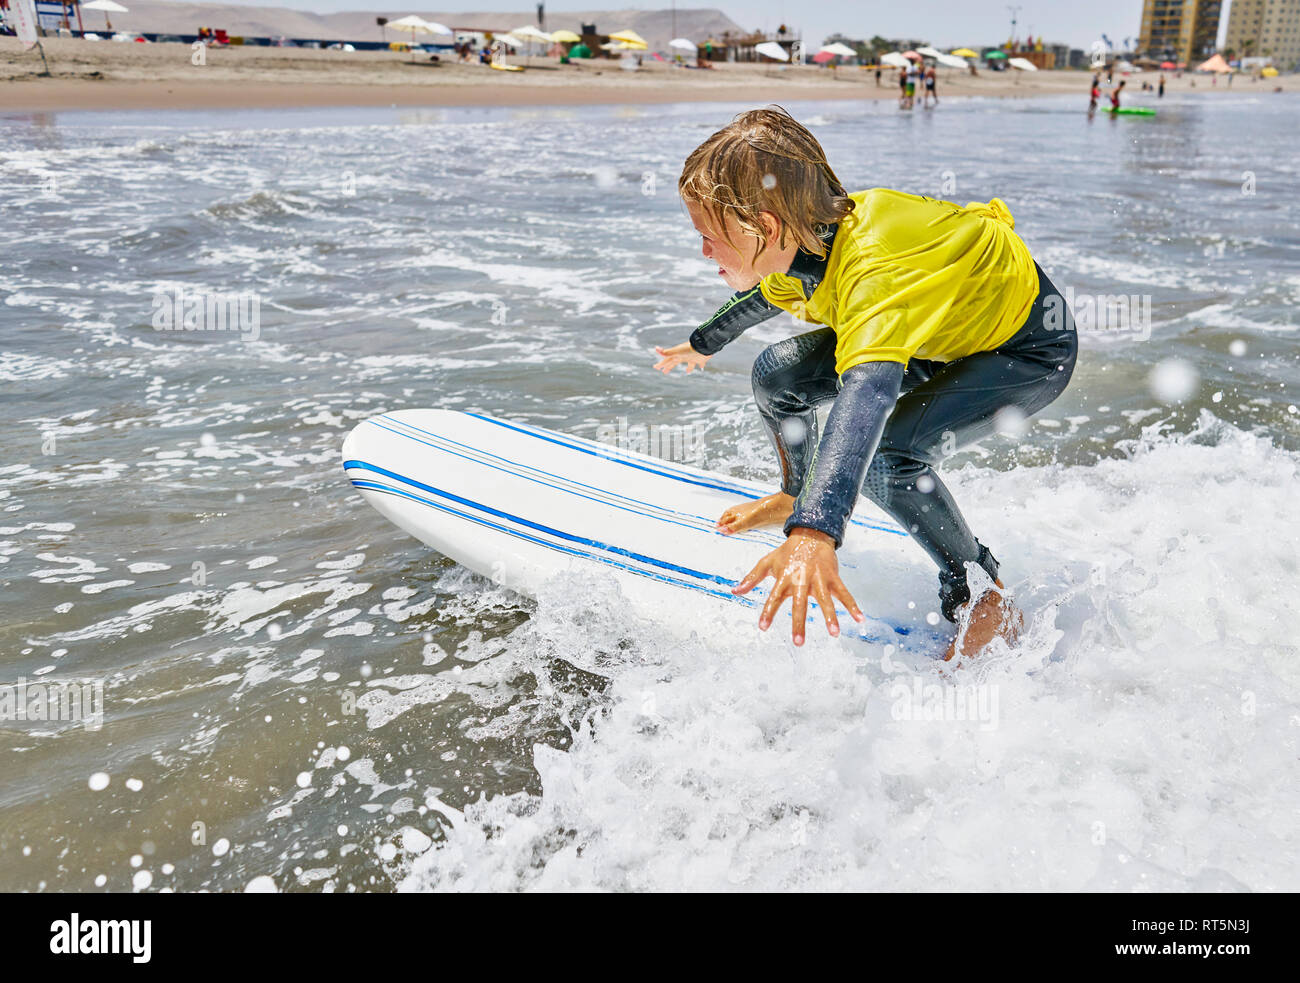 Chile, Arica, boy surfing in the sea Stock Photo